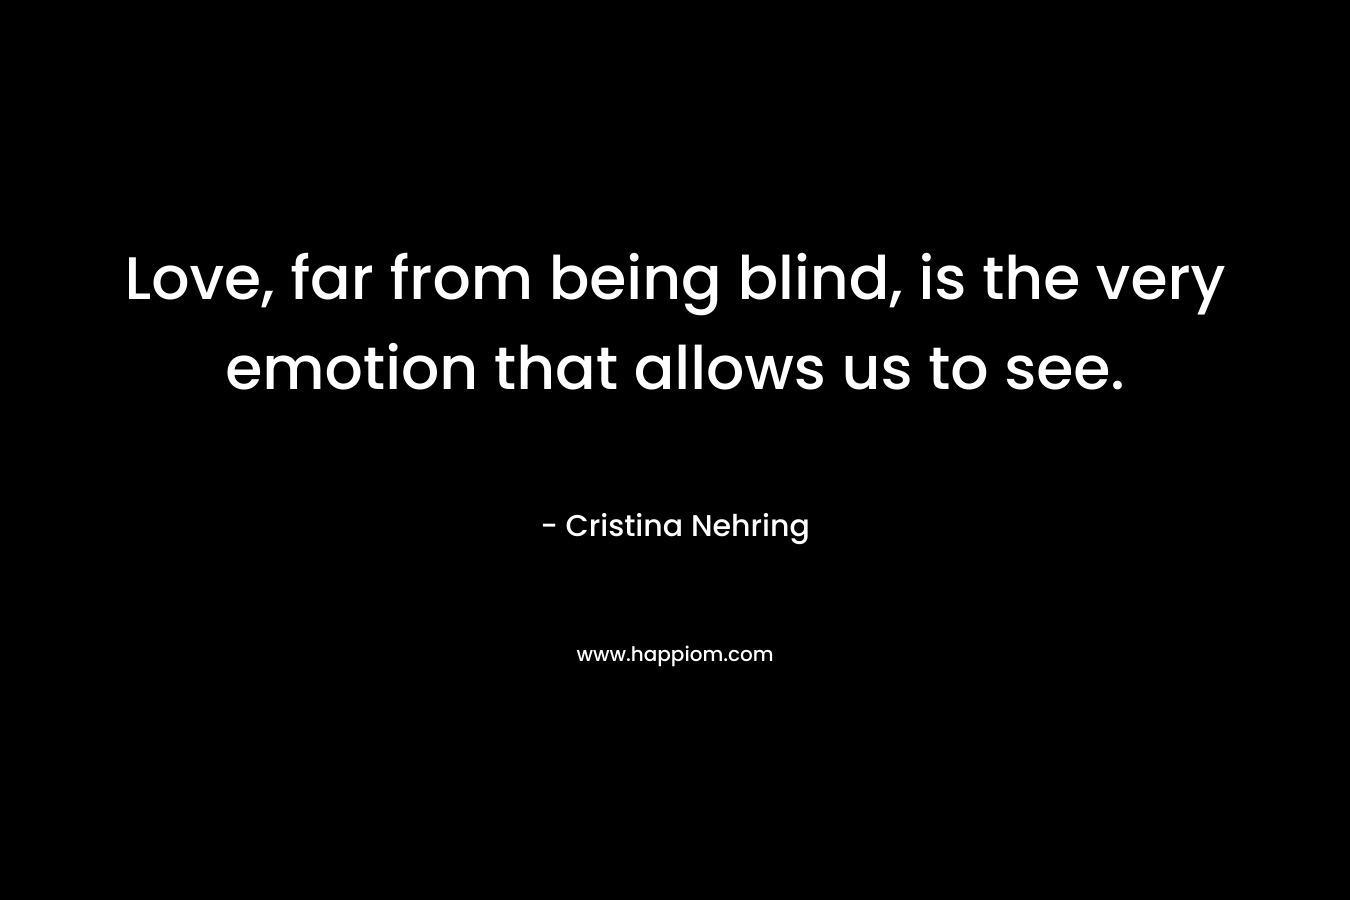 Love, far from being blind, is the very emotion that allows us to see. – Cristina Nehring